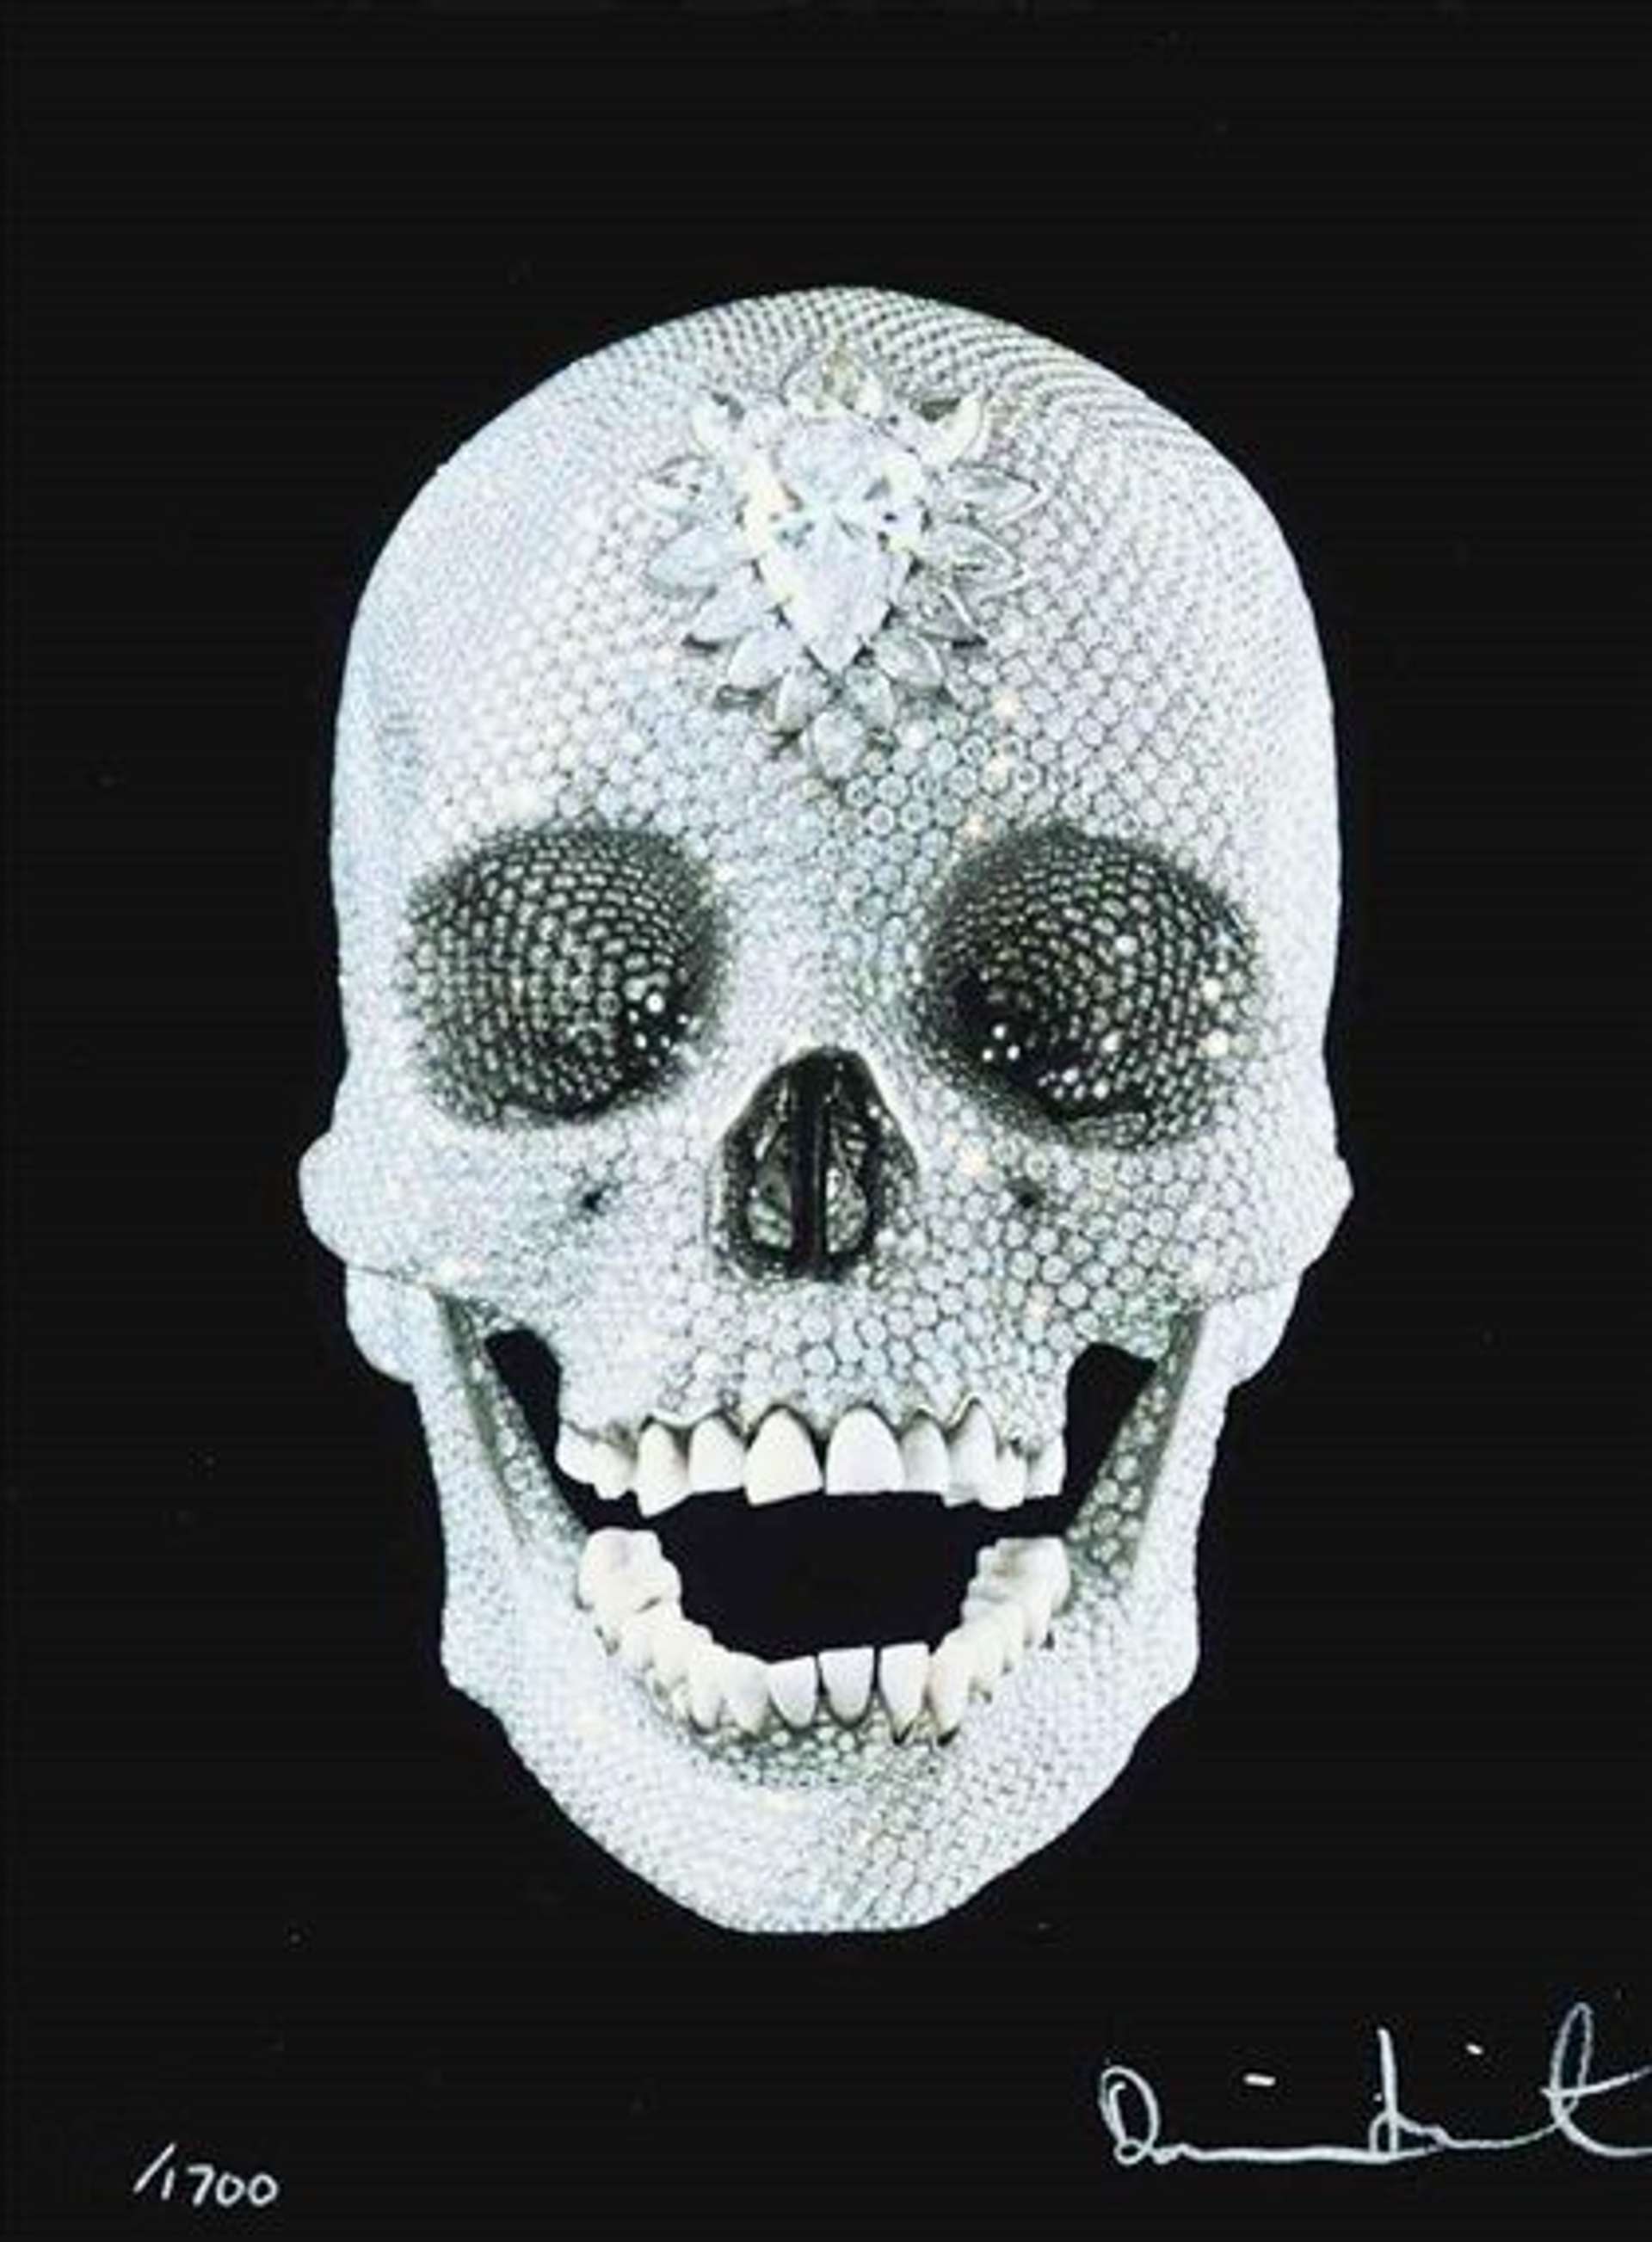 For The Love Of God, Believe by Damien Hirst